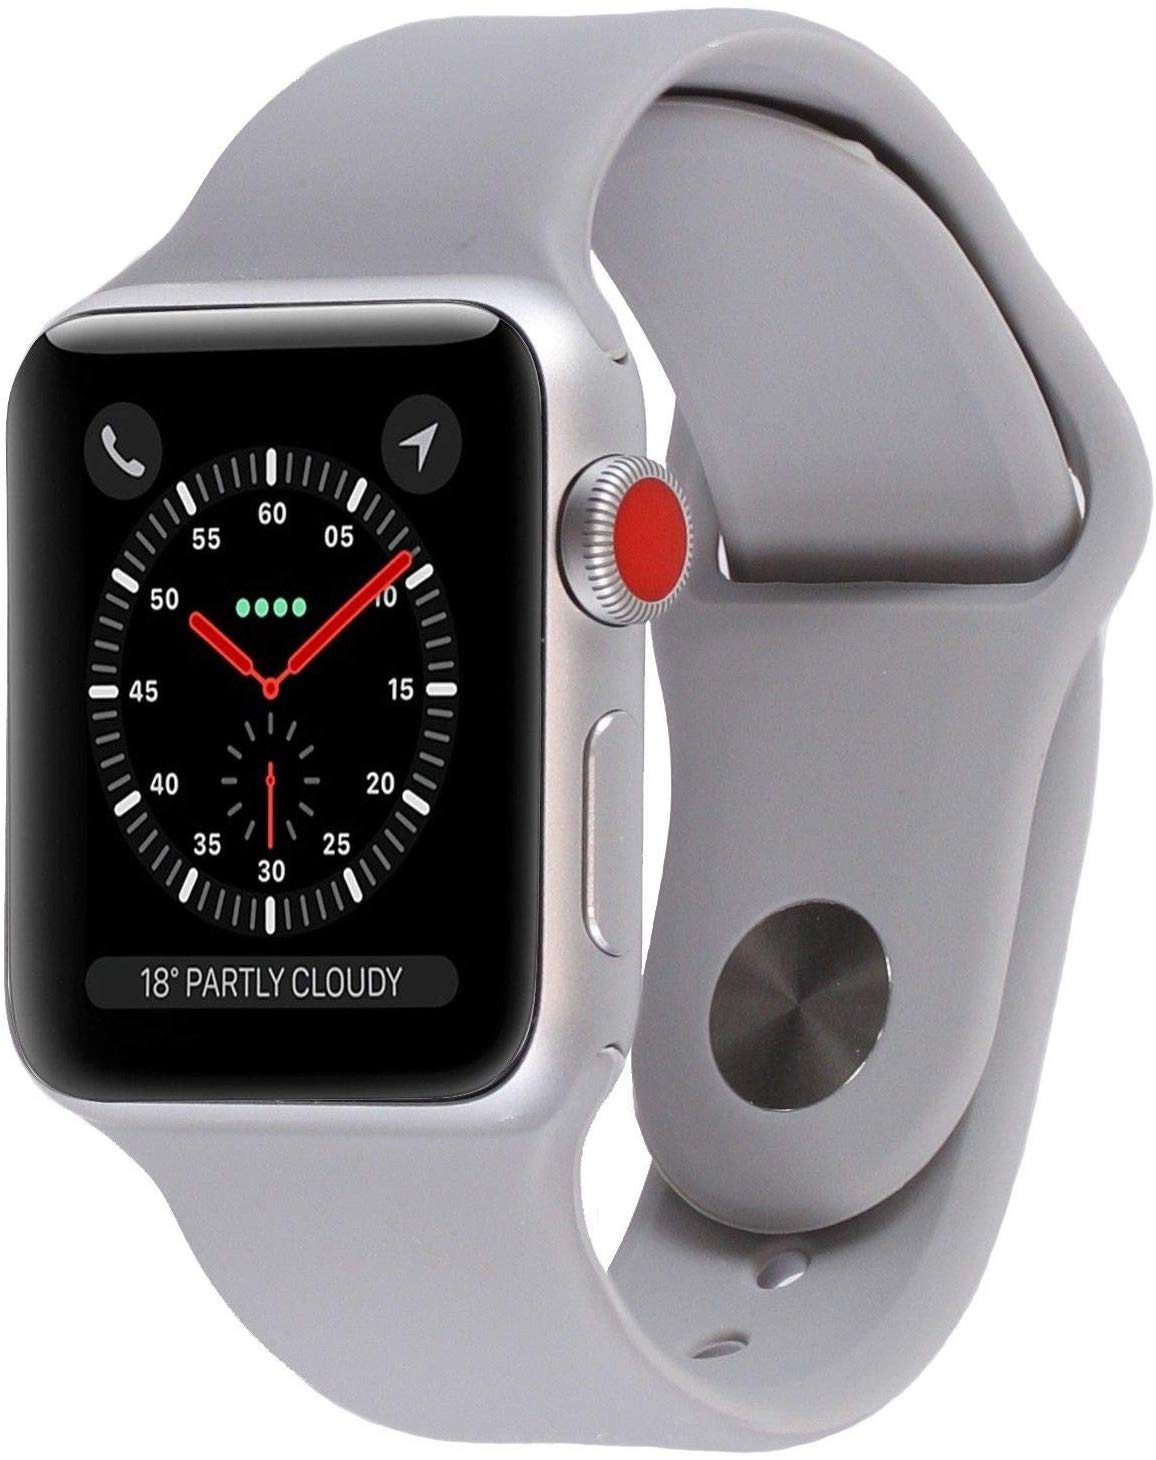 Apple Watch Series 3 - GPS+Cellular - Silver Aluminum Case with Fog